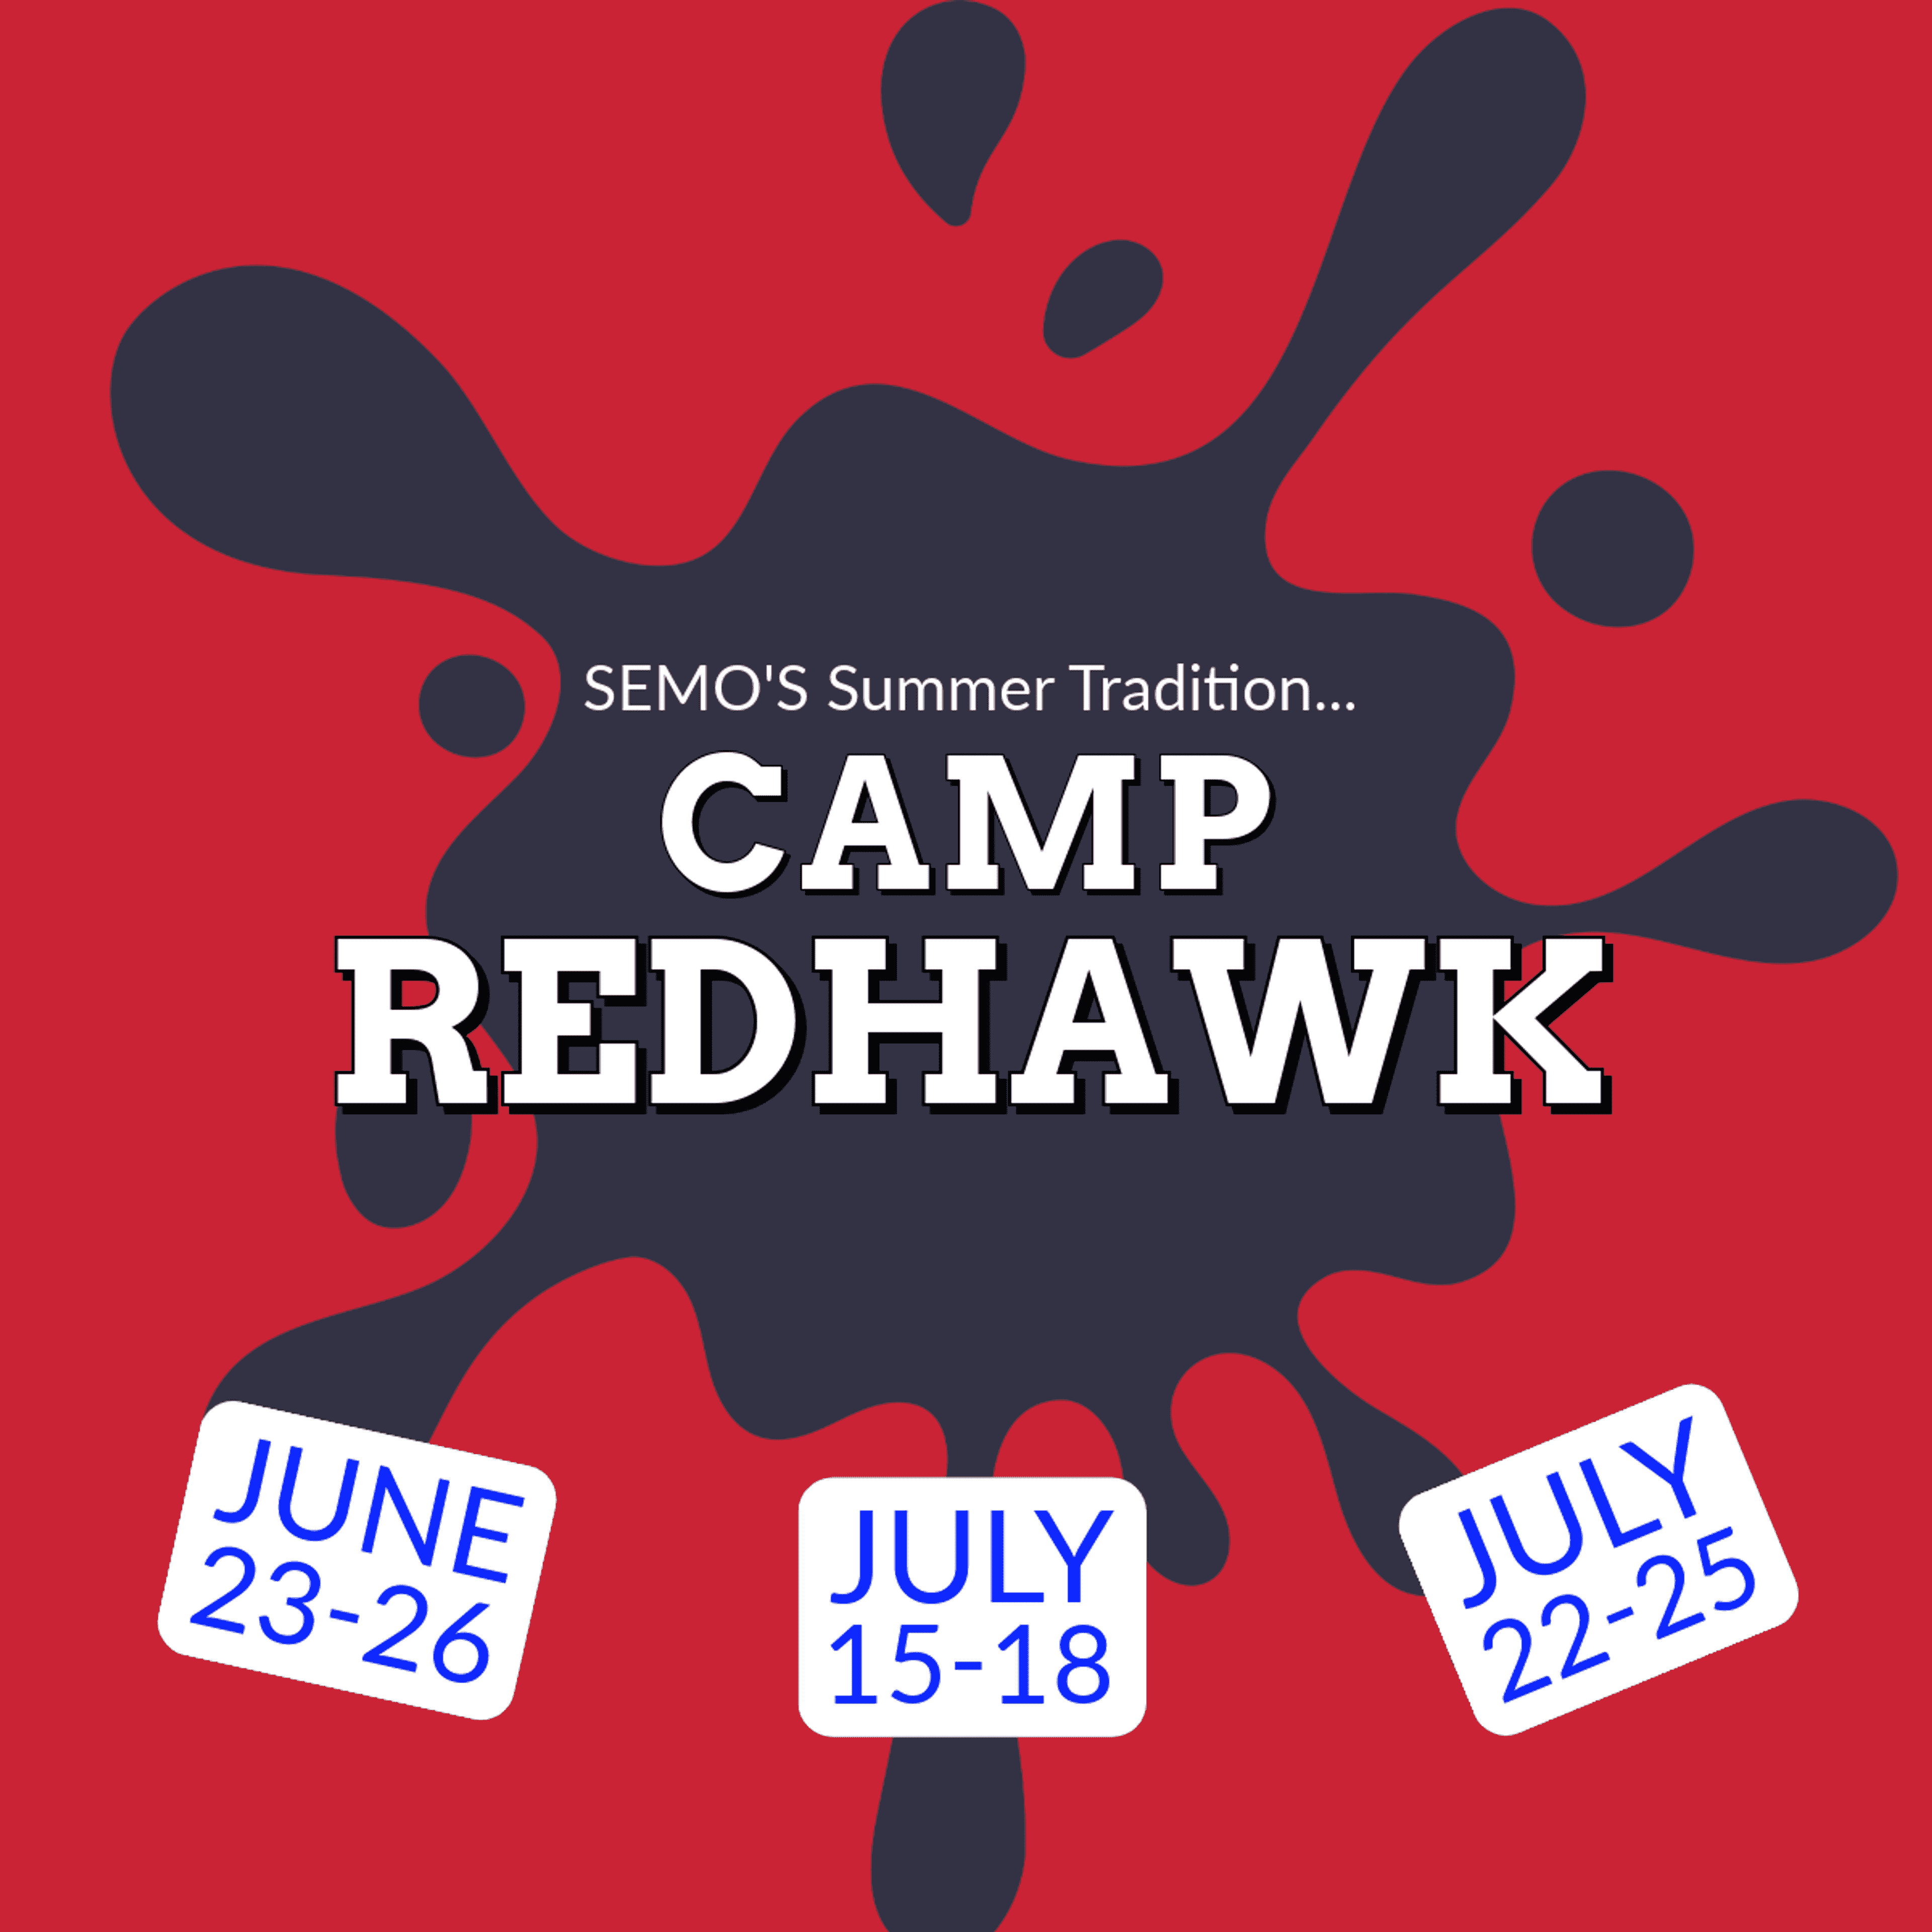 Camp Redhawk: The summer camp for incoming SEMO students